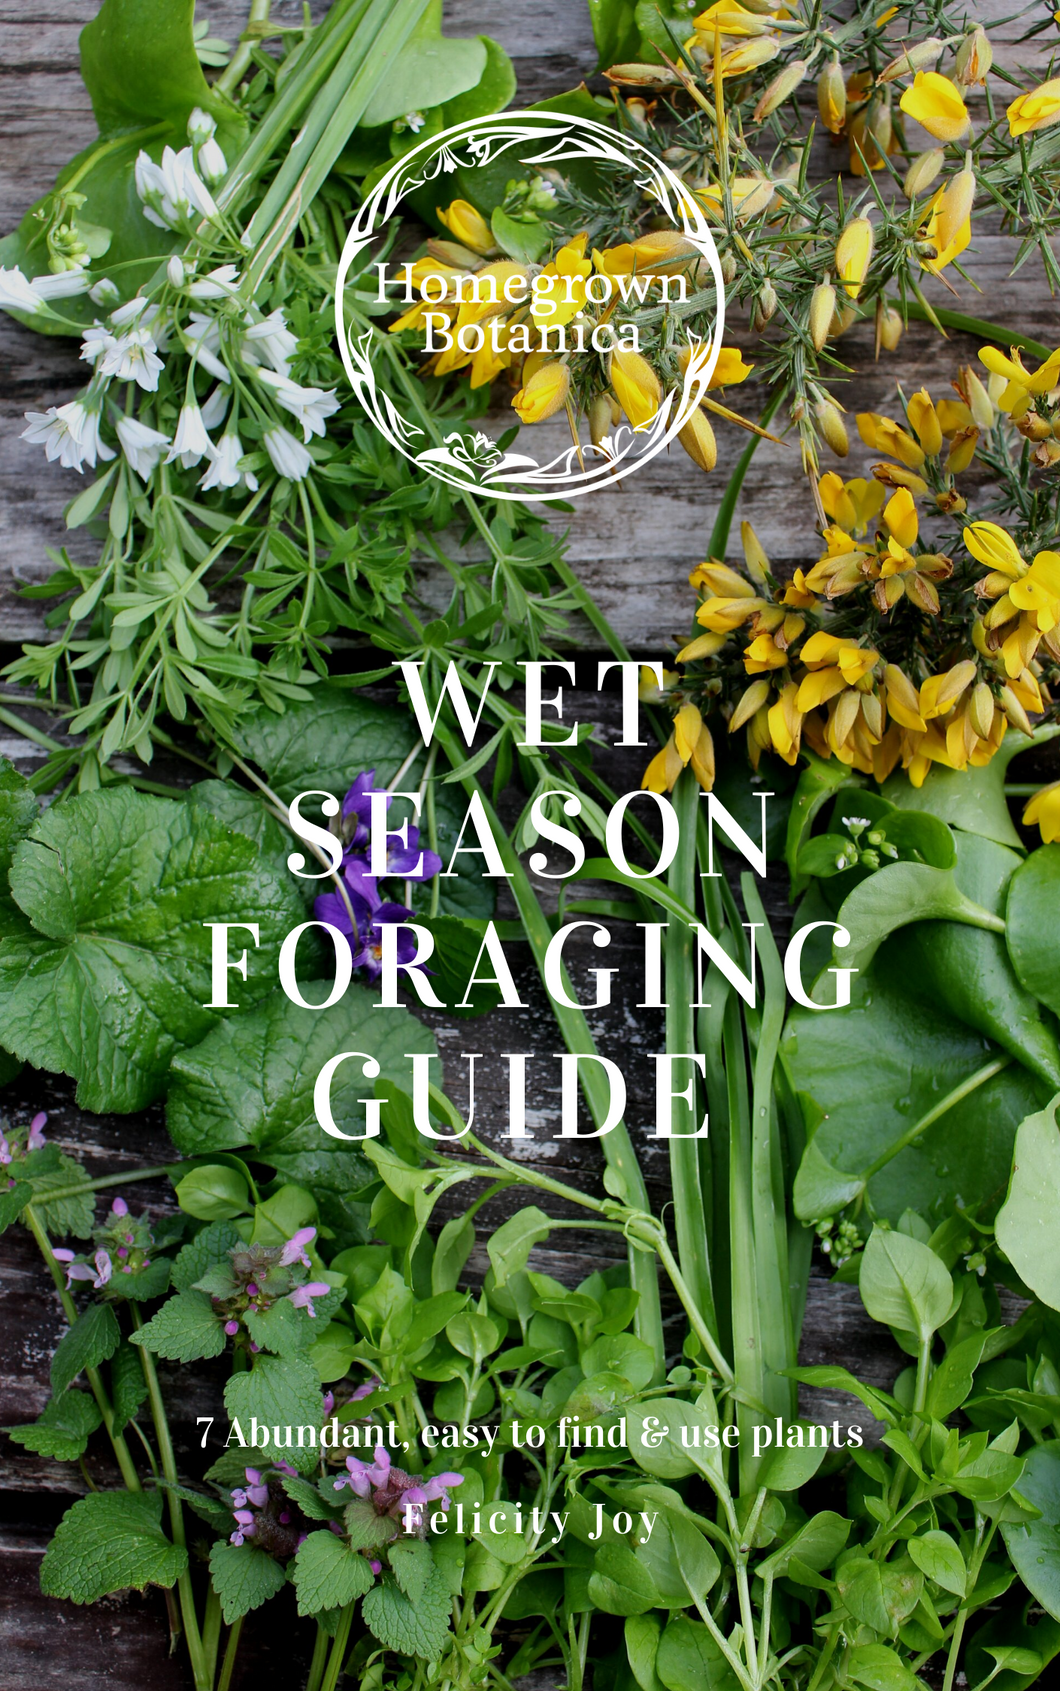 Wet Season Foraging Guide Cover learn to forage for wild weeds